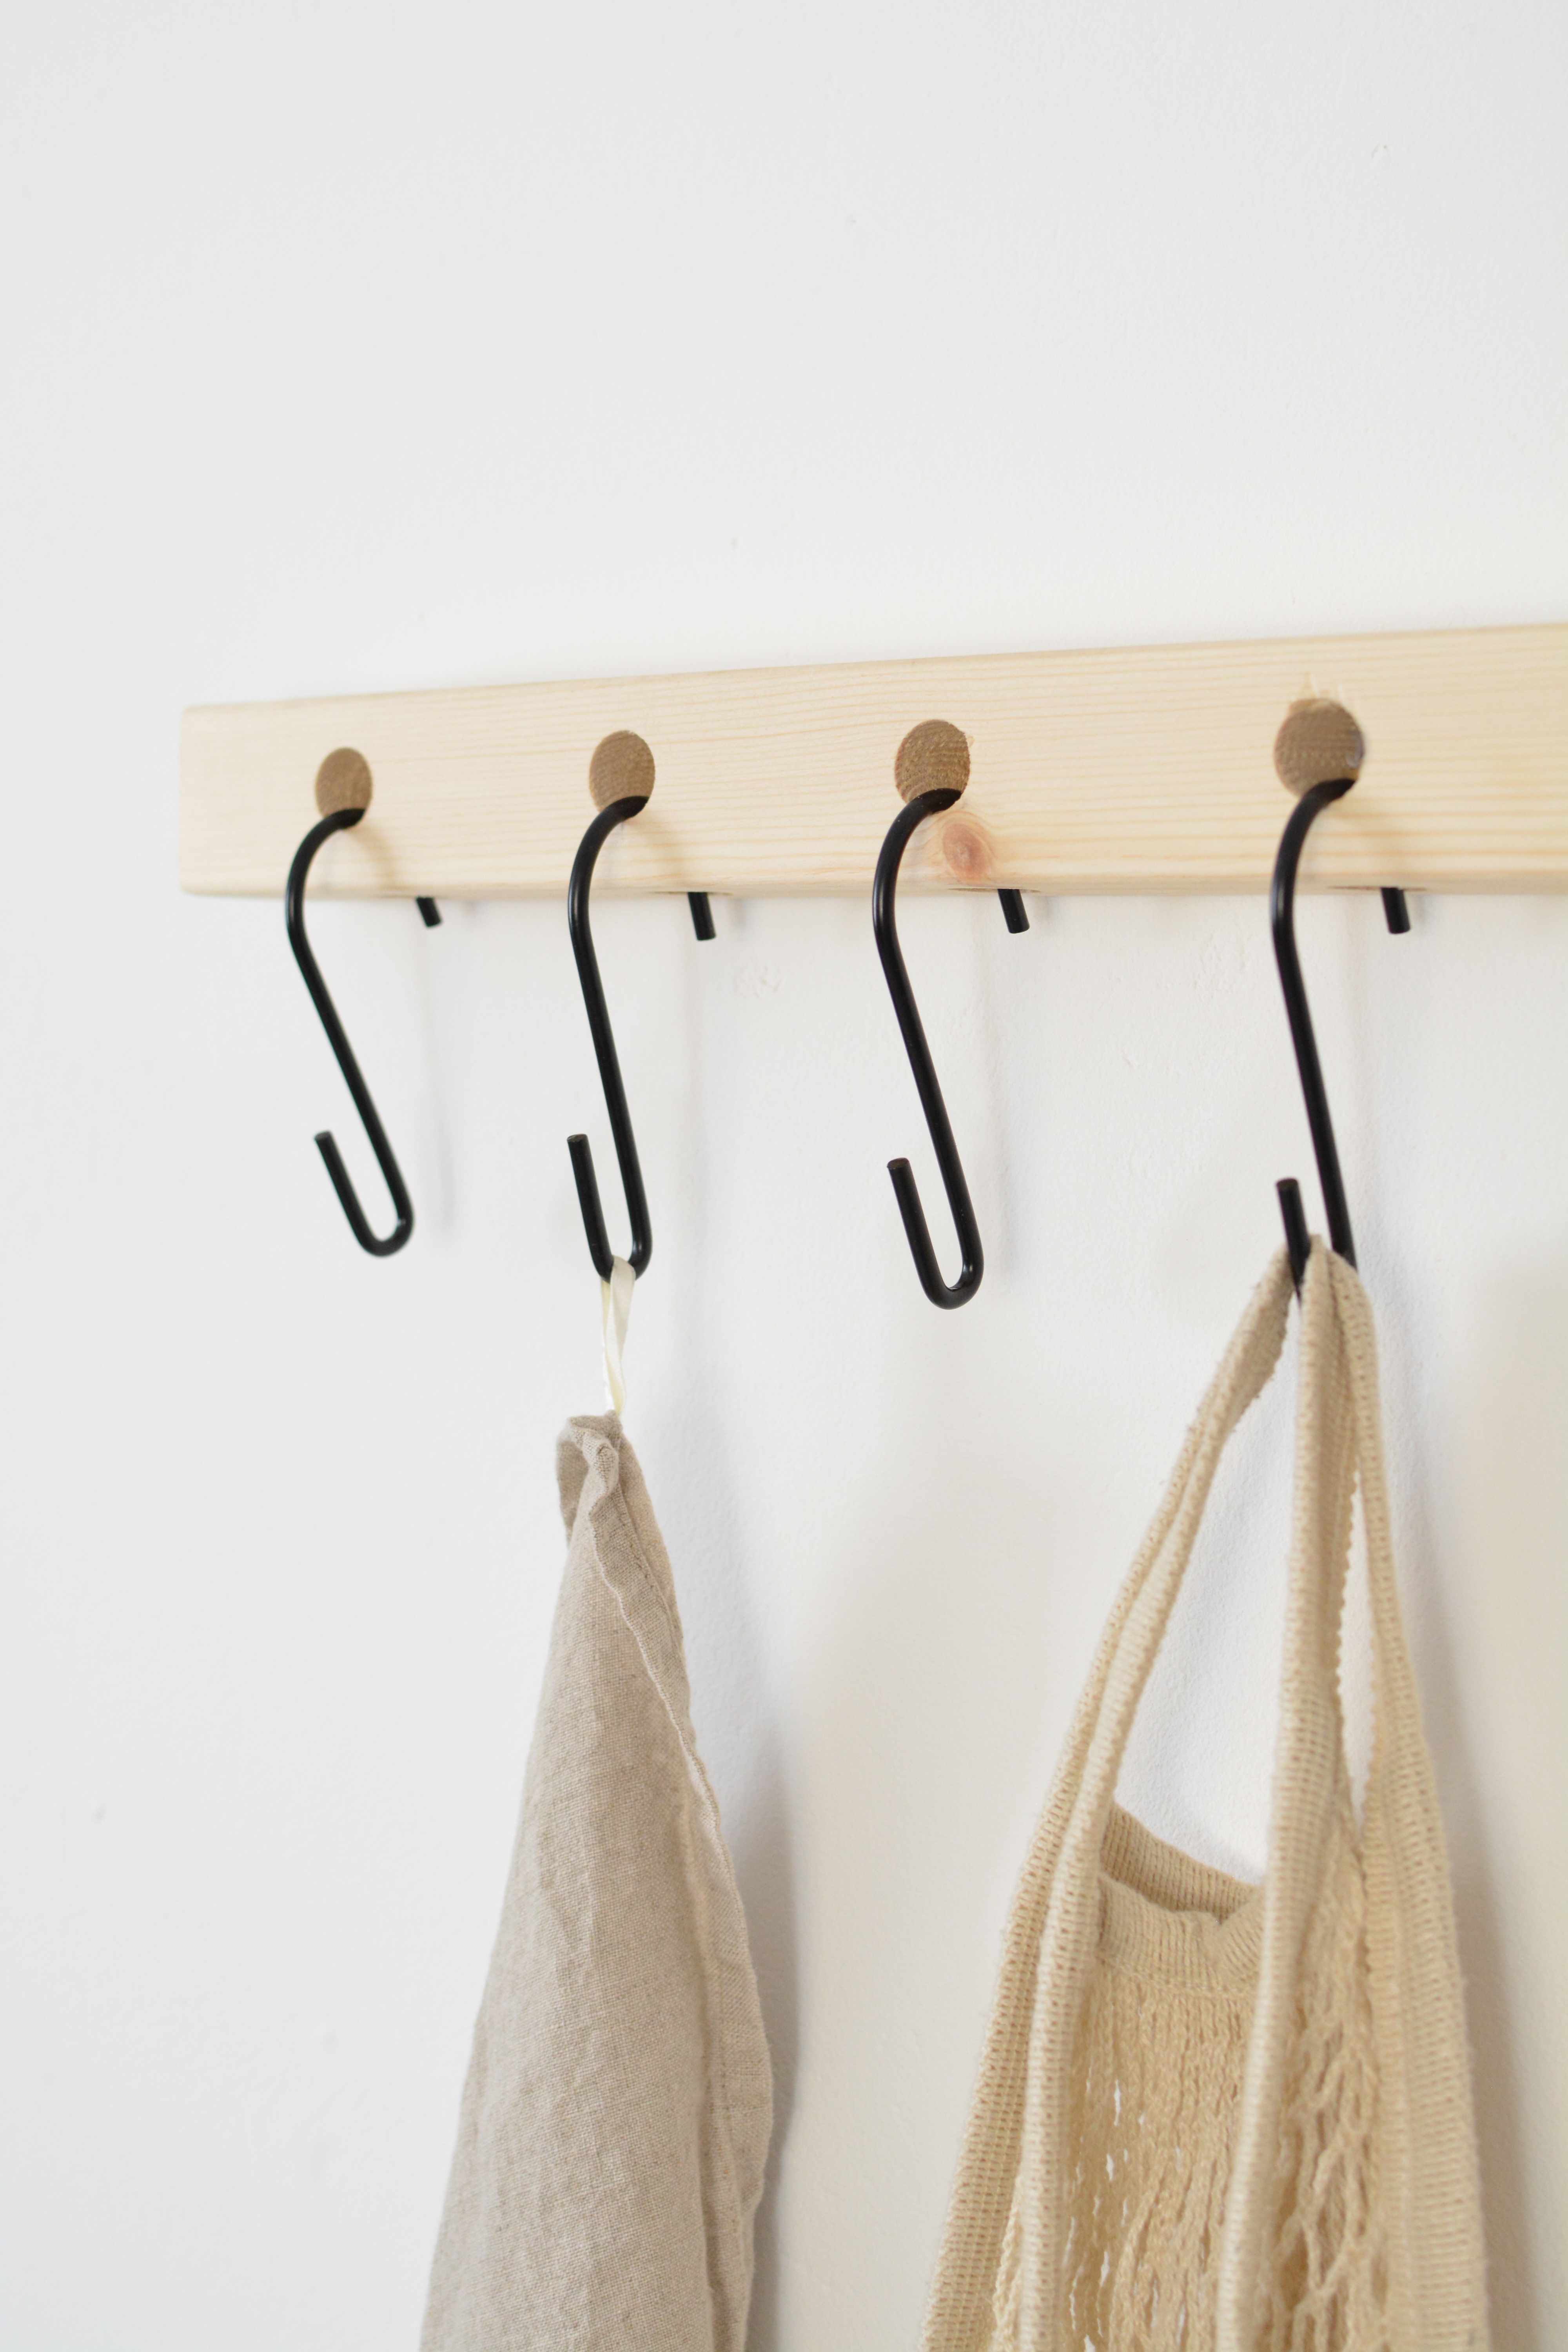 Meet the S-Hook Shelf: A Simple Way to Squeeze Extra Storage Into